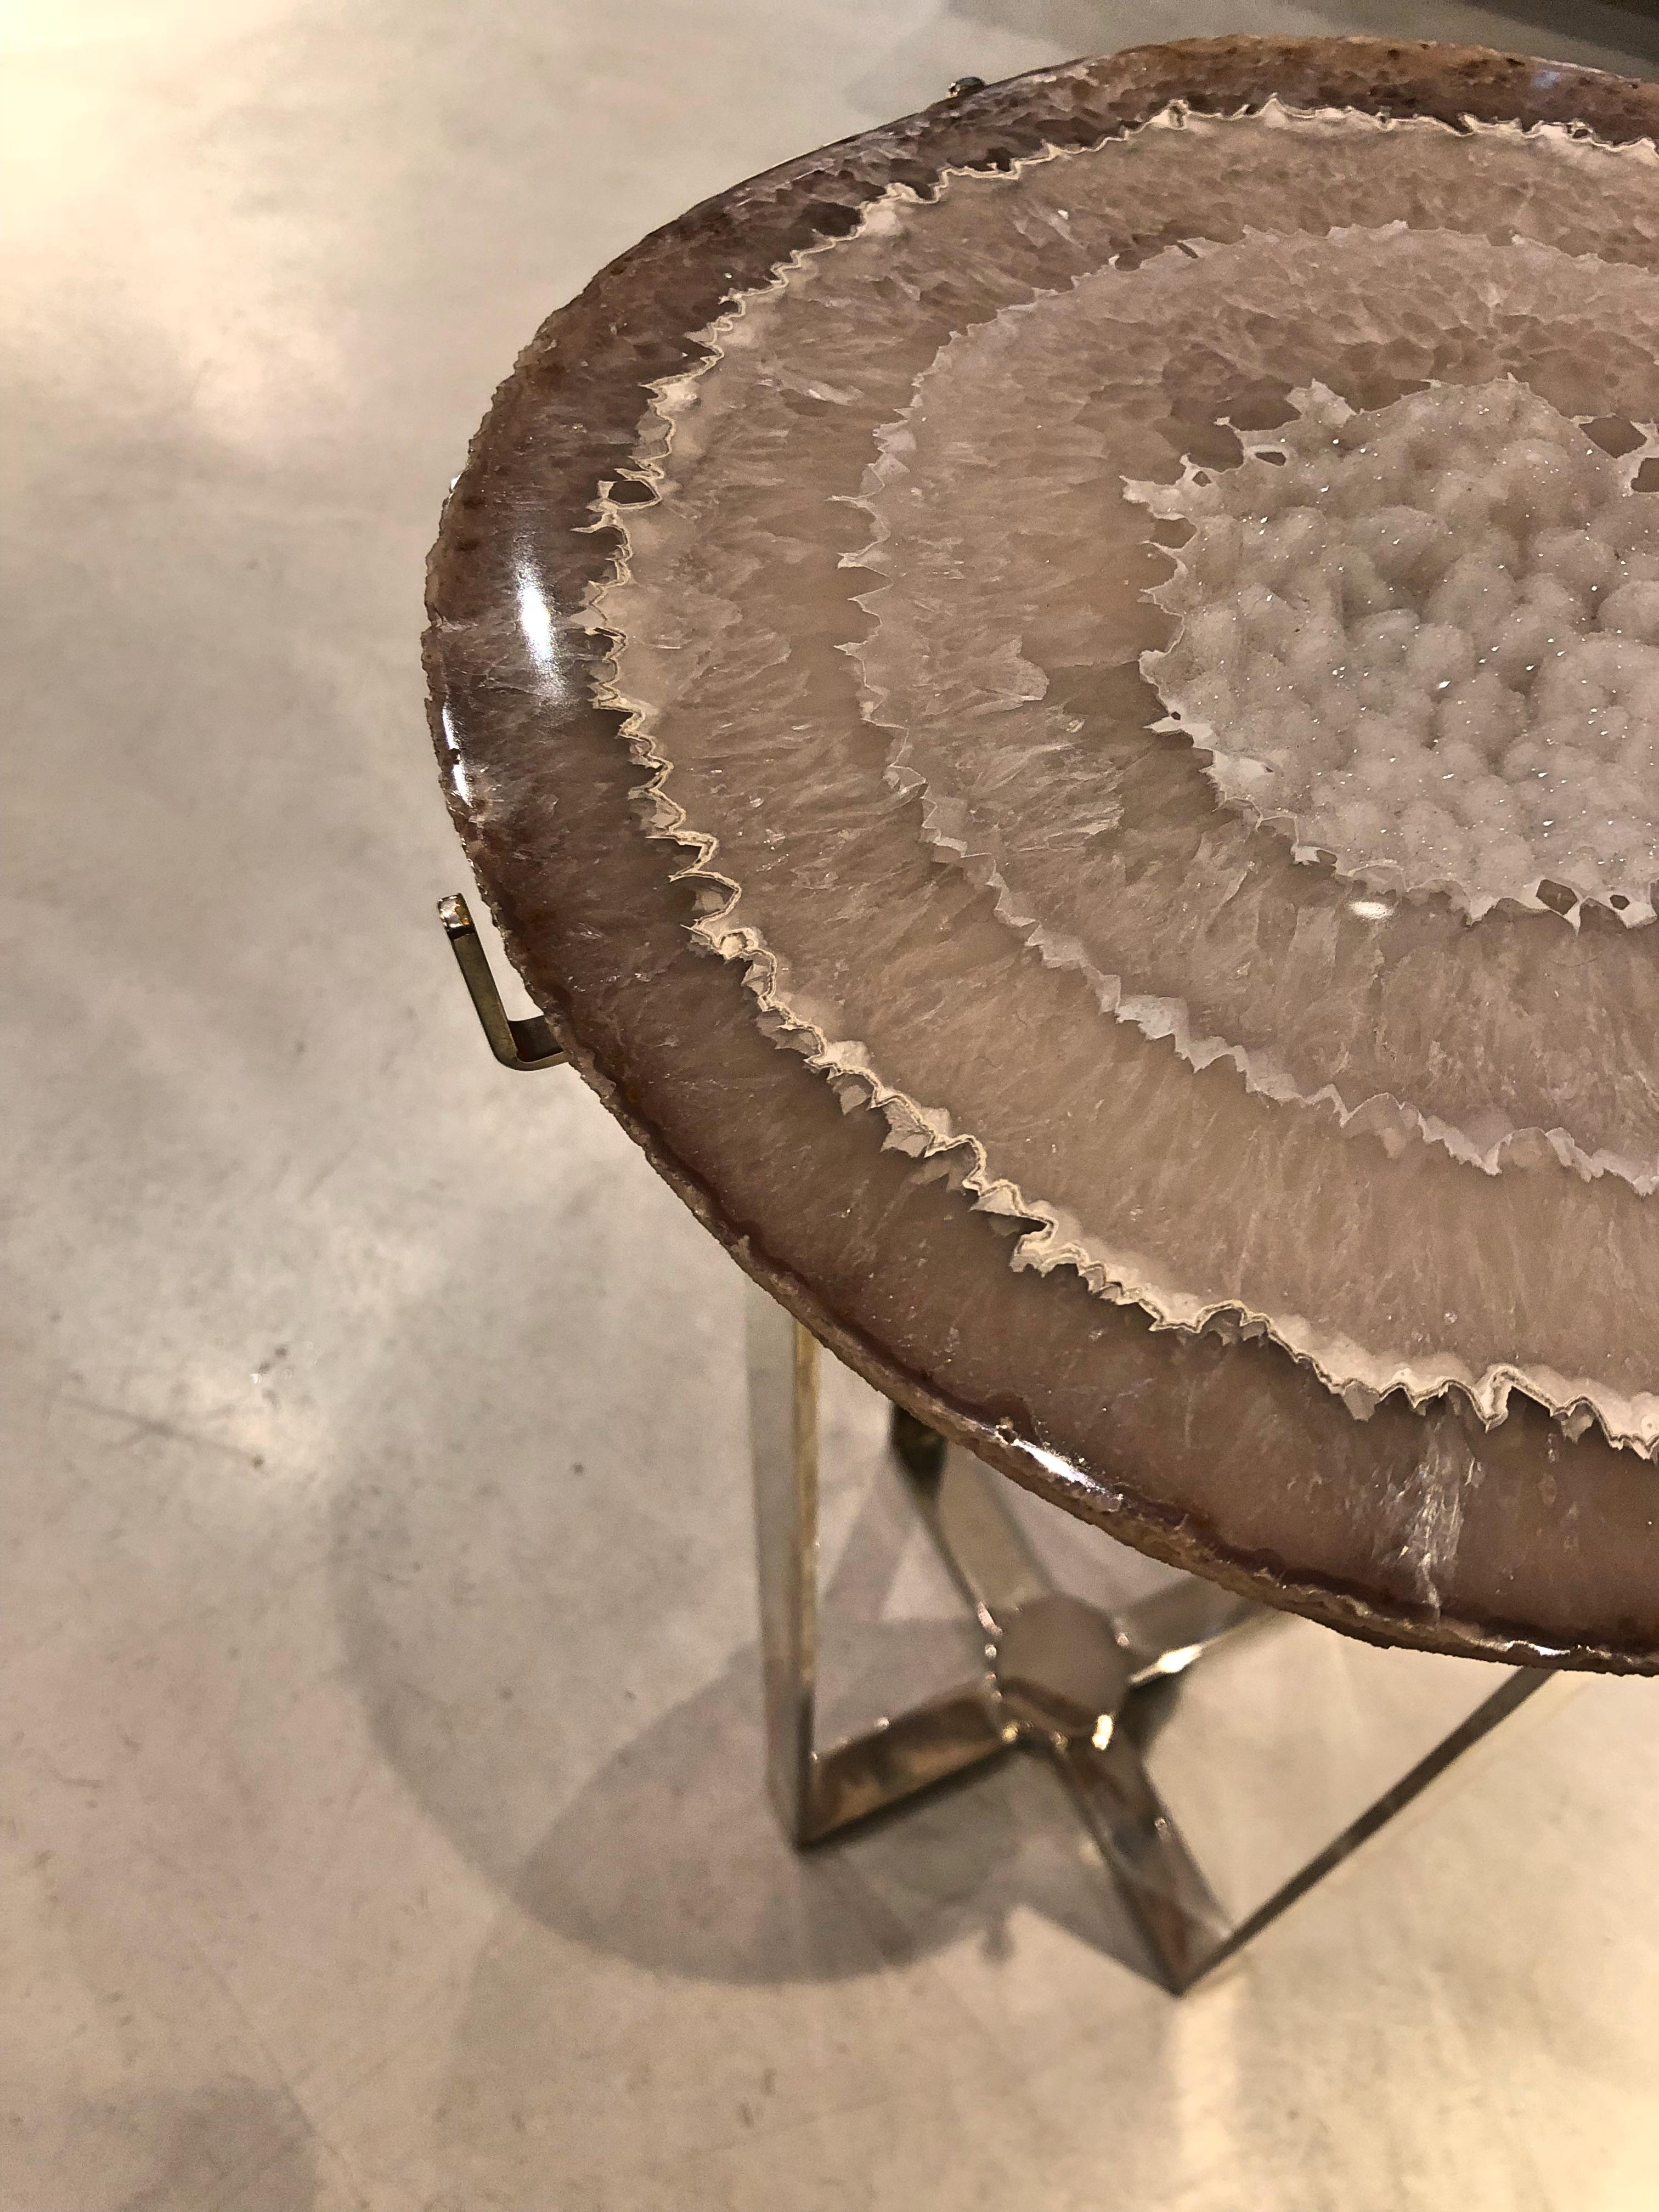 Coffee side table made with natural unique agate stone and brass base nickel-plated.
The natural stone integrates with the different design languages, combining straight and sinuous curves in a sophisticated fluidity.
The different colors of